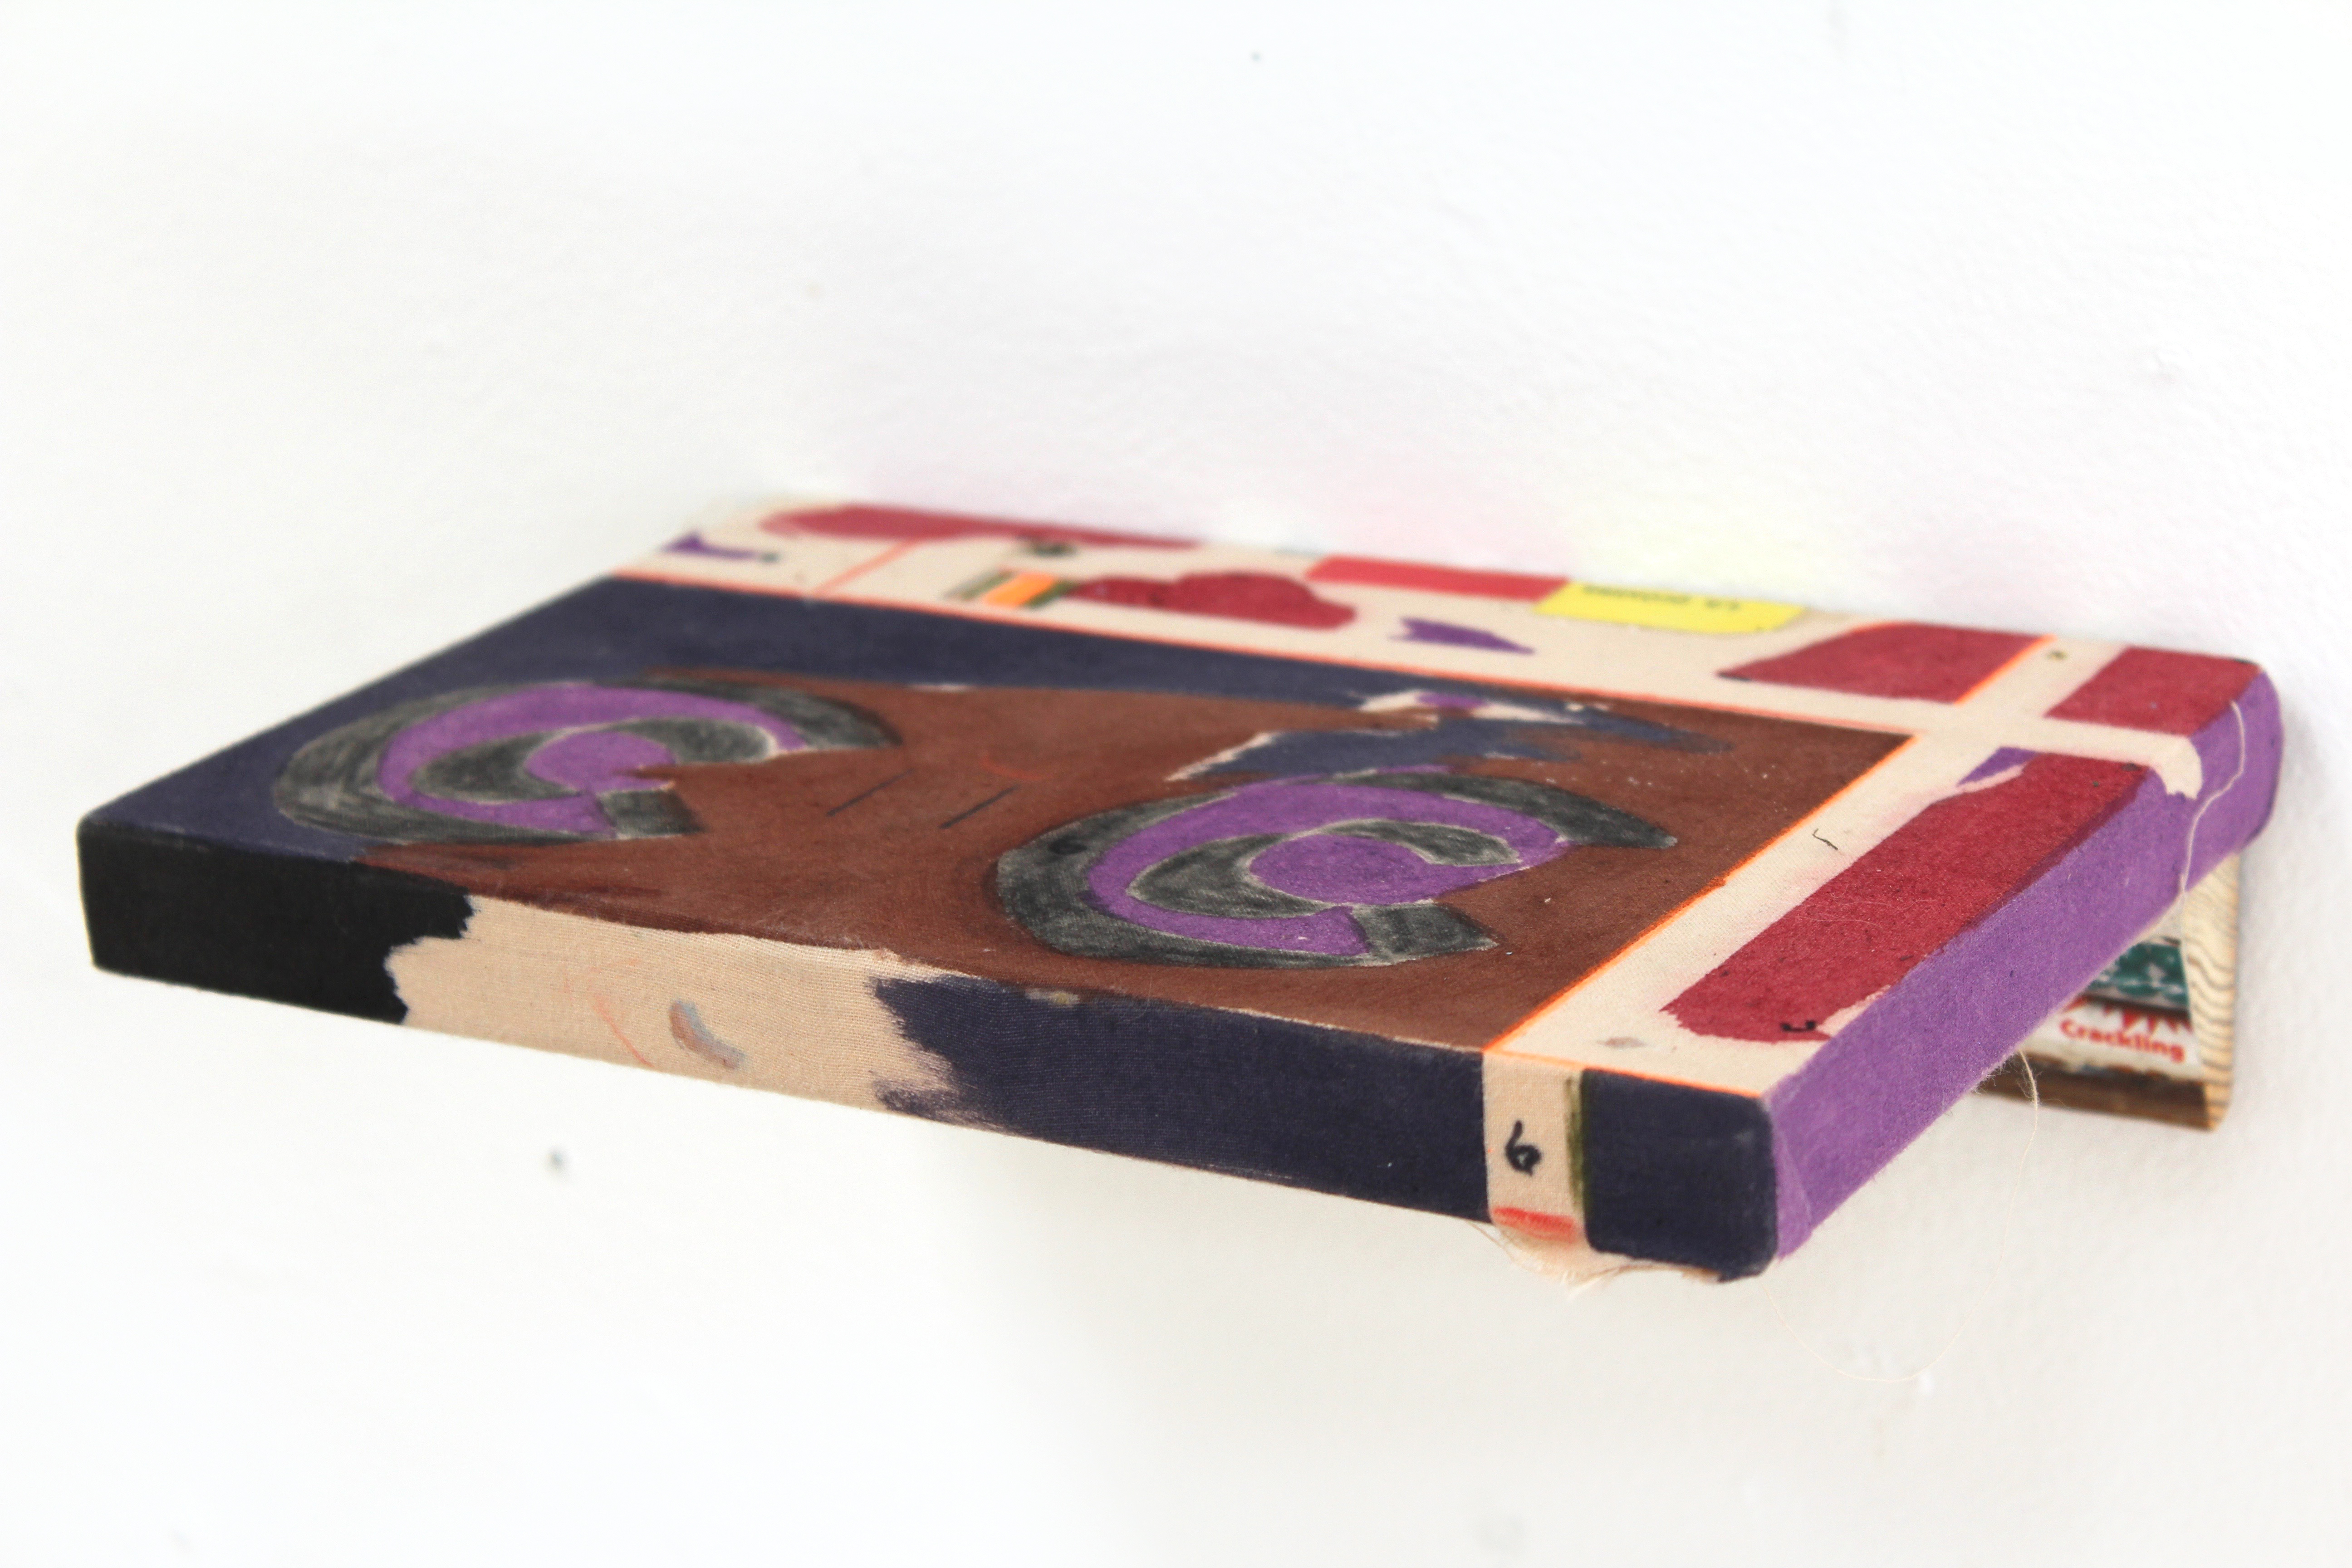 Kevin McNamee-Tweed.<em> CC Shelf</em>, 2019. Ink on muslin mounted to wood with affixed sticker and newsprint, 2 1/2 x 9 x 6 inches (6.4 x 22.9 x 15.2 cm)